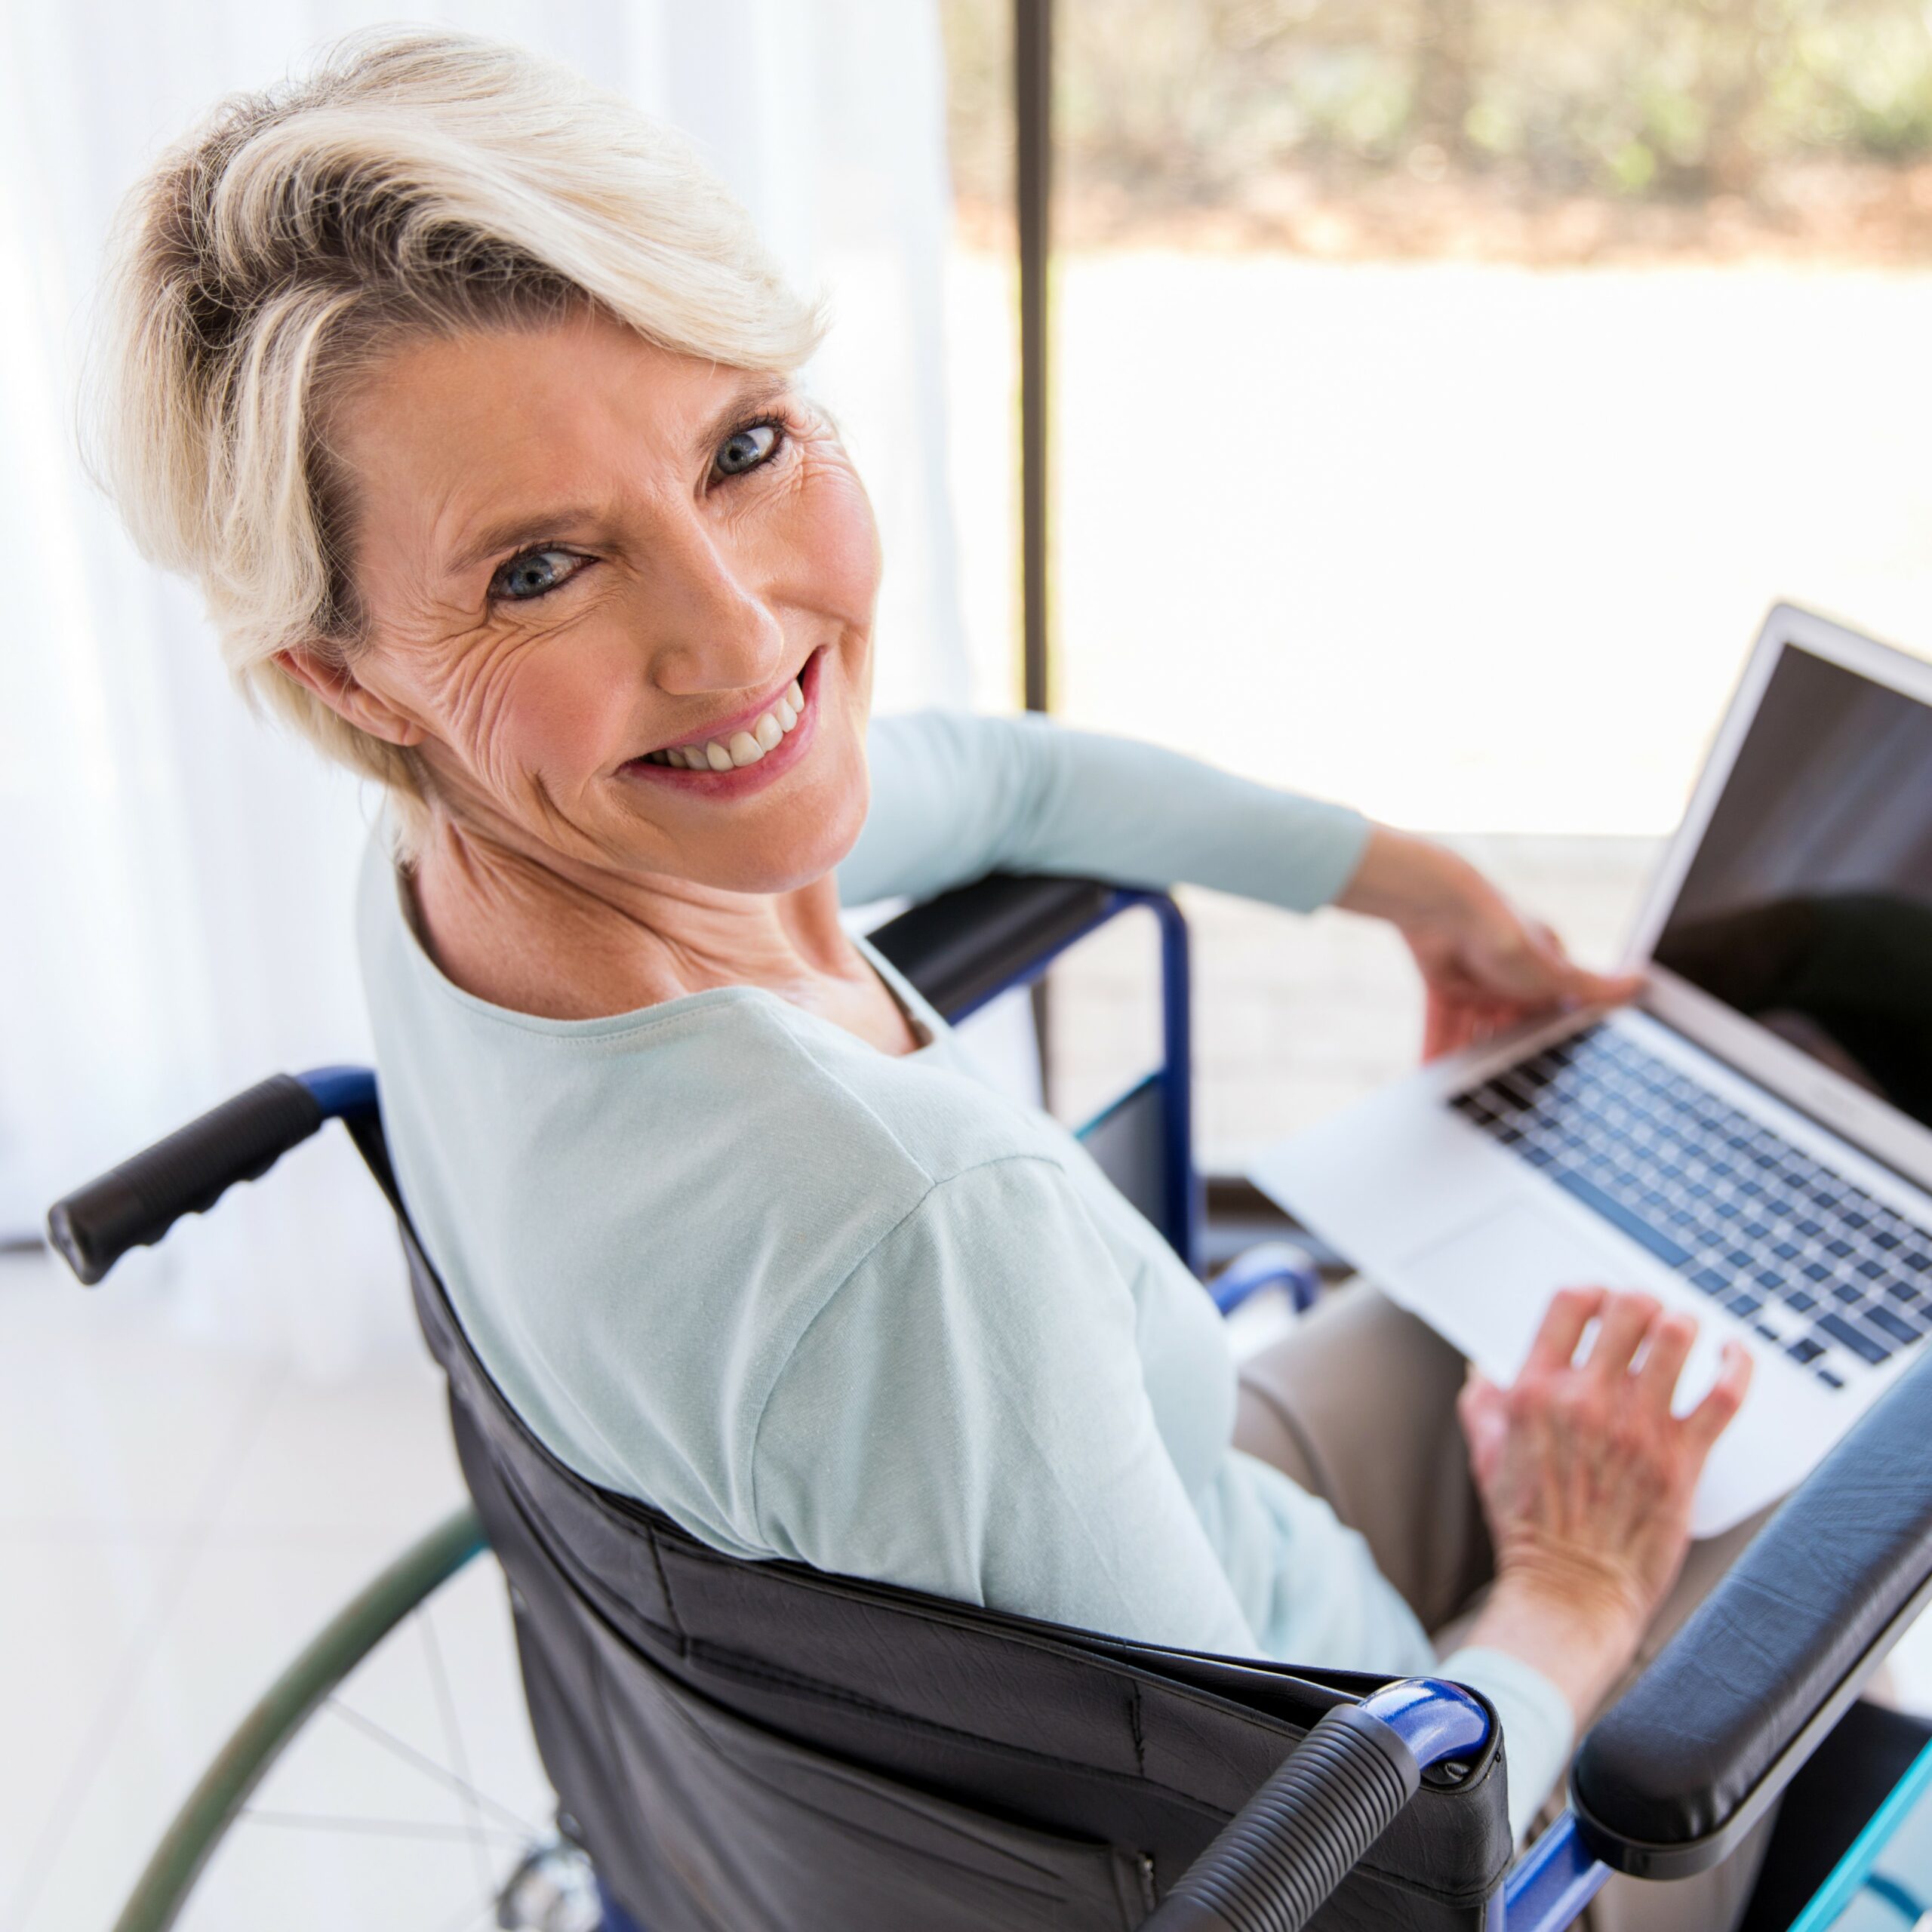 pretty disabled middle aged woman with laptop computer at home